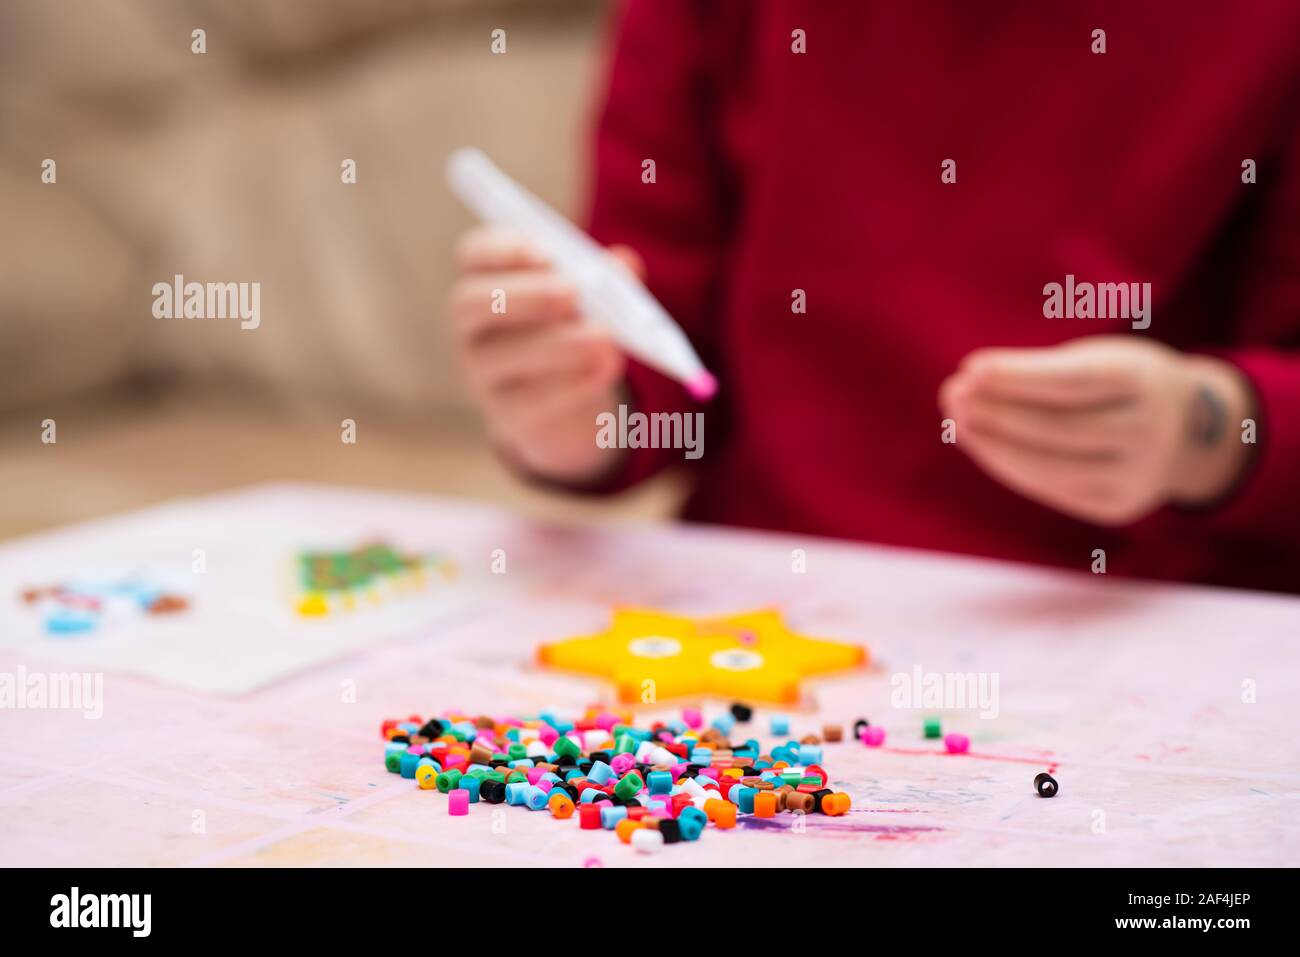 Colorful fusible beads or perler beads, on the children's table. Toy that develops the imagination of child. Soft blurred background with copy space Stock Photo